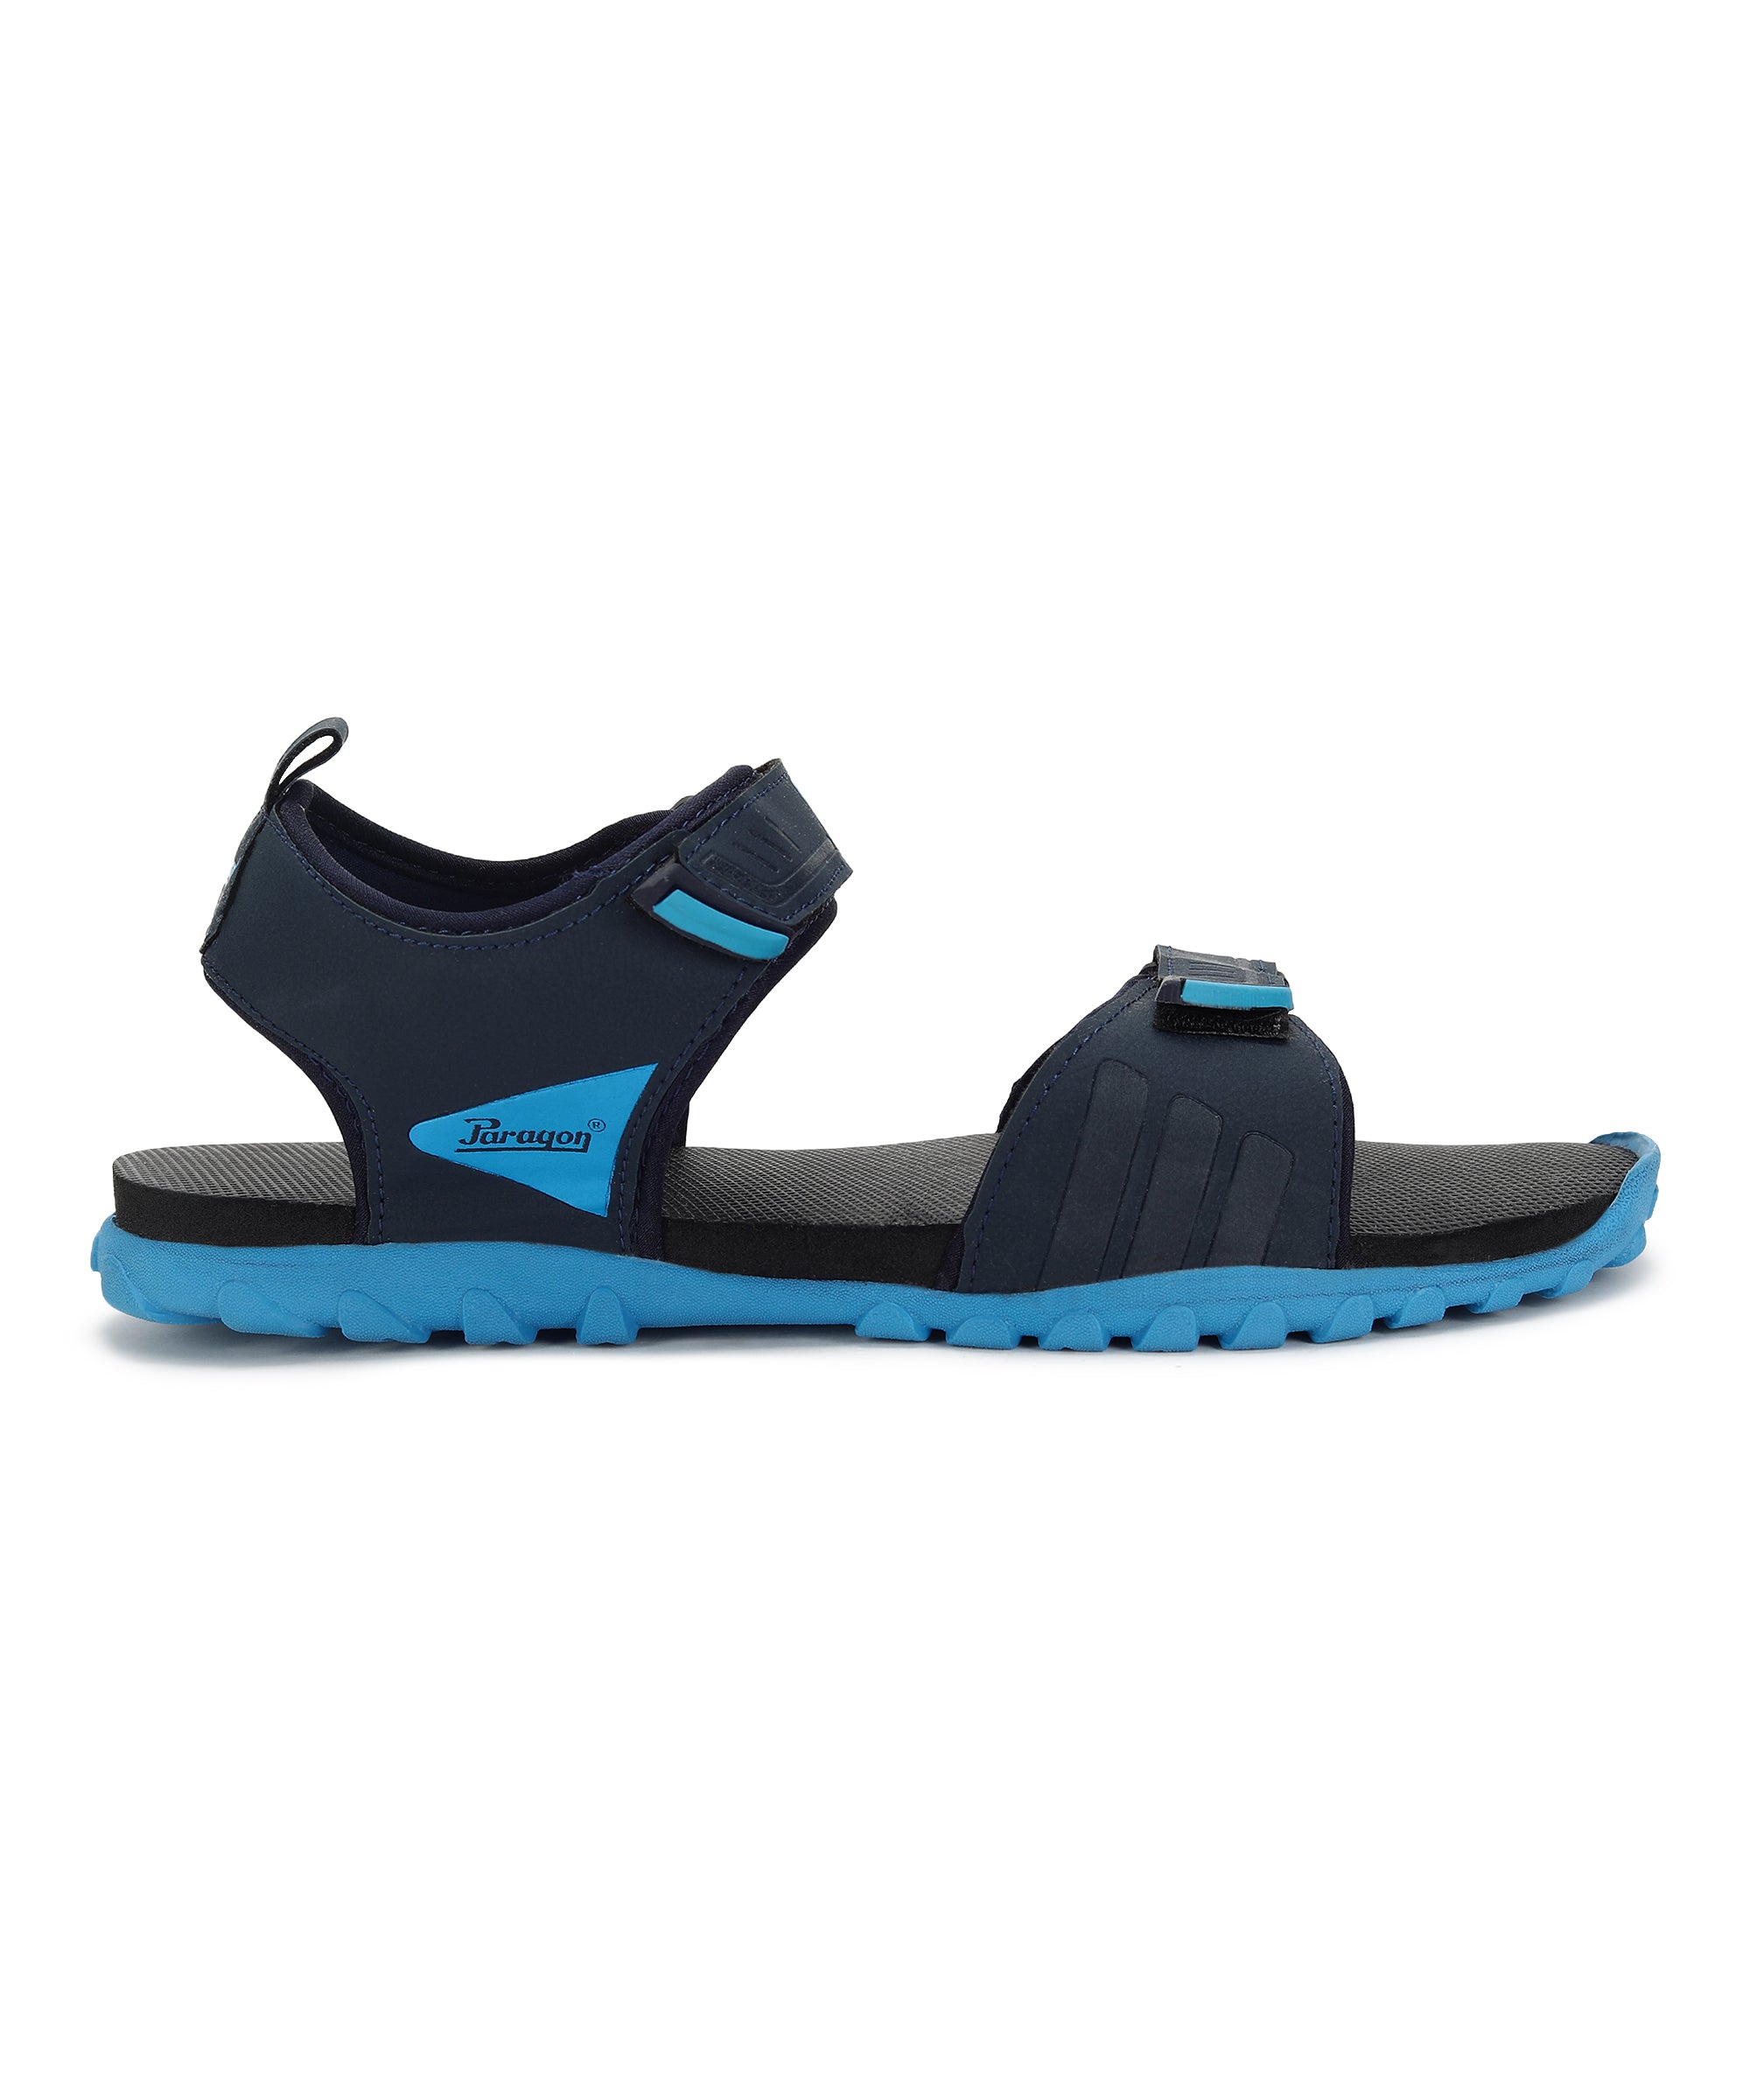 Paragon Blot K1420G Men Stylish Sandals | Comfortable Sandals for Daily Outdoor Use | Casual Formal Sandals with Cushioned Soles